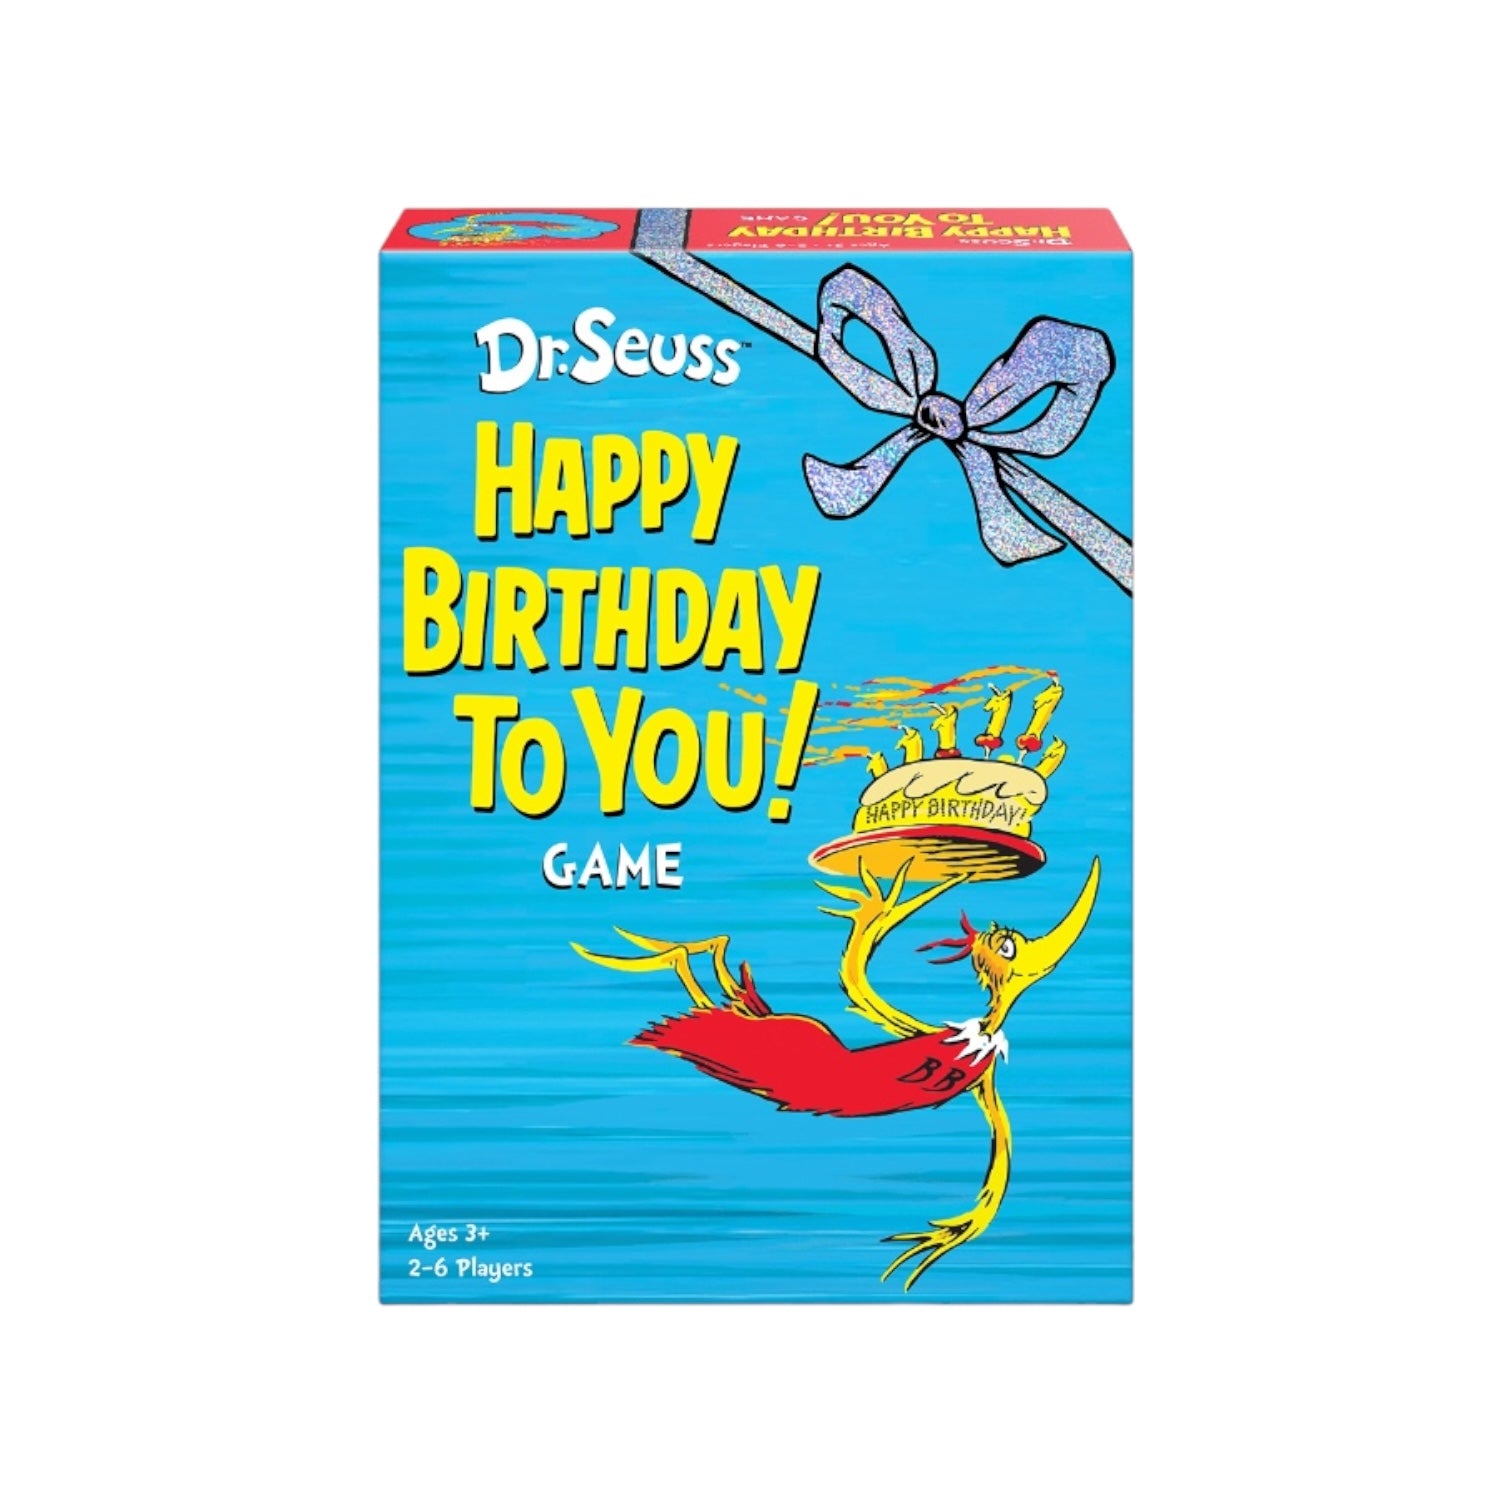 Happy Birthday to you Funko board game - Dr Suess